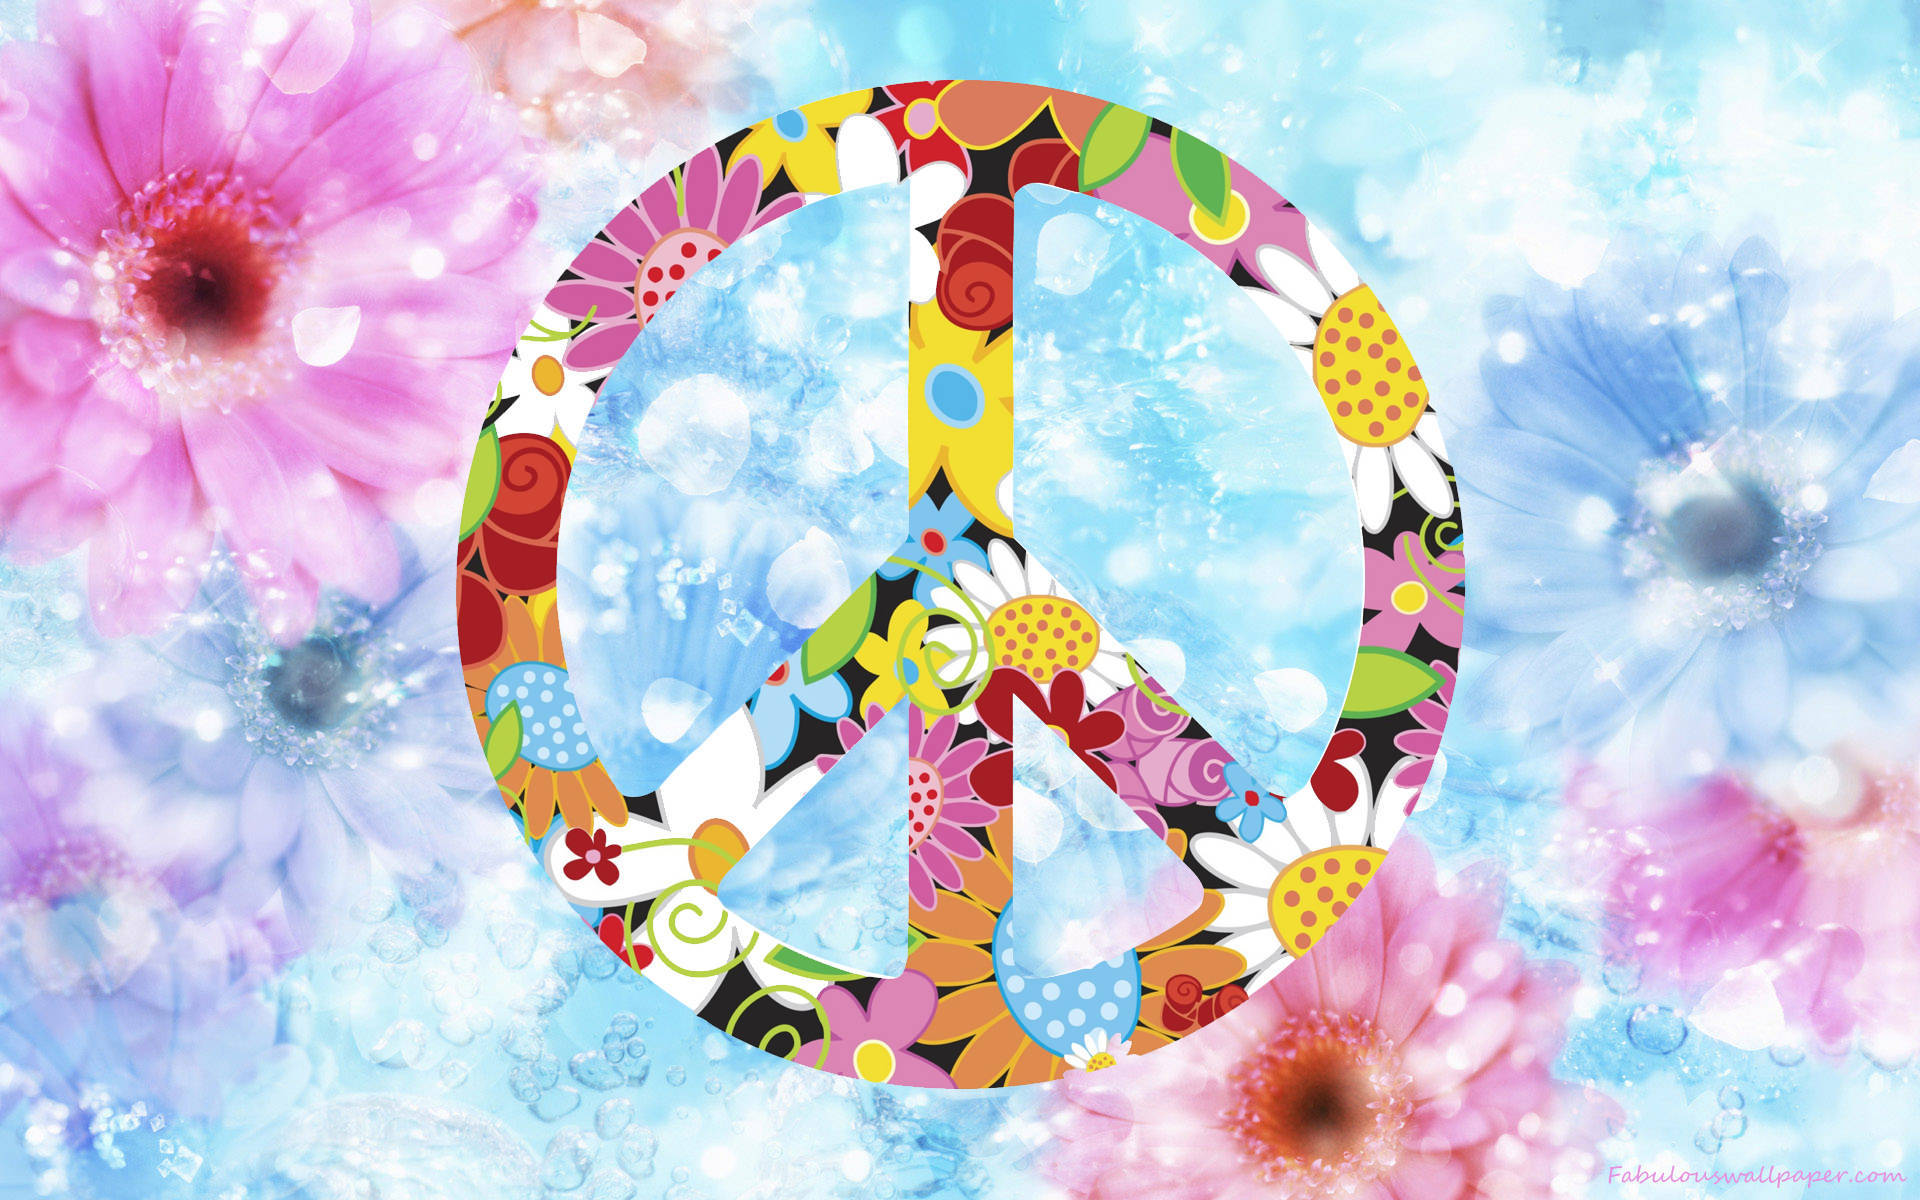 Free Peace Symbol Wallpaper Downloads, [100+] Peace Symbol Wallpapers for  FREE 